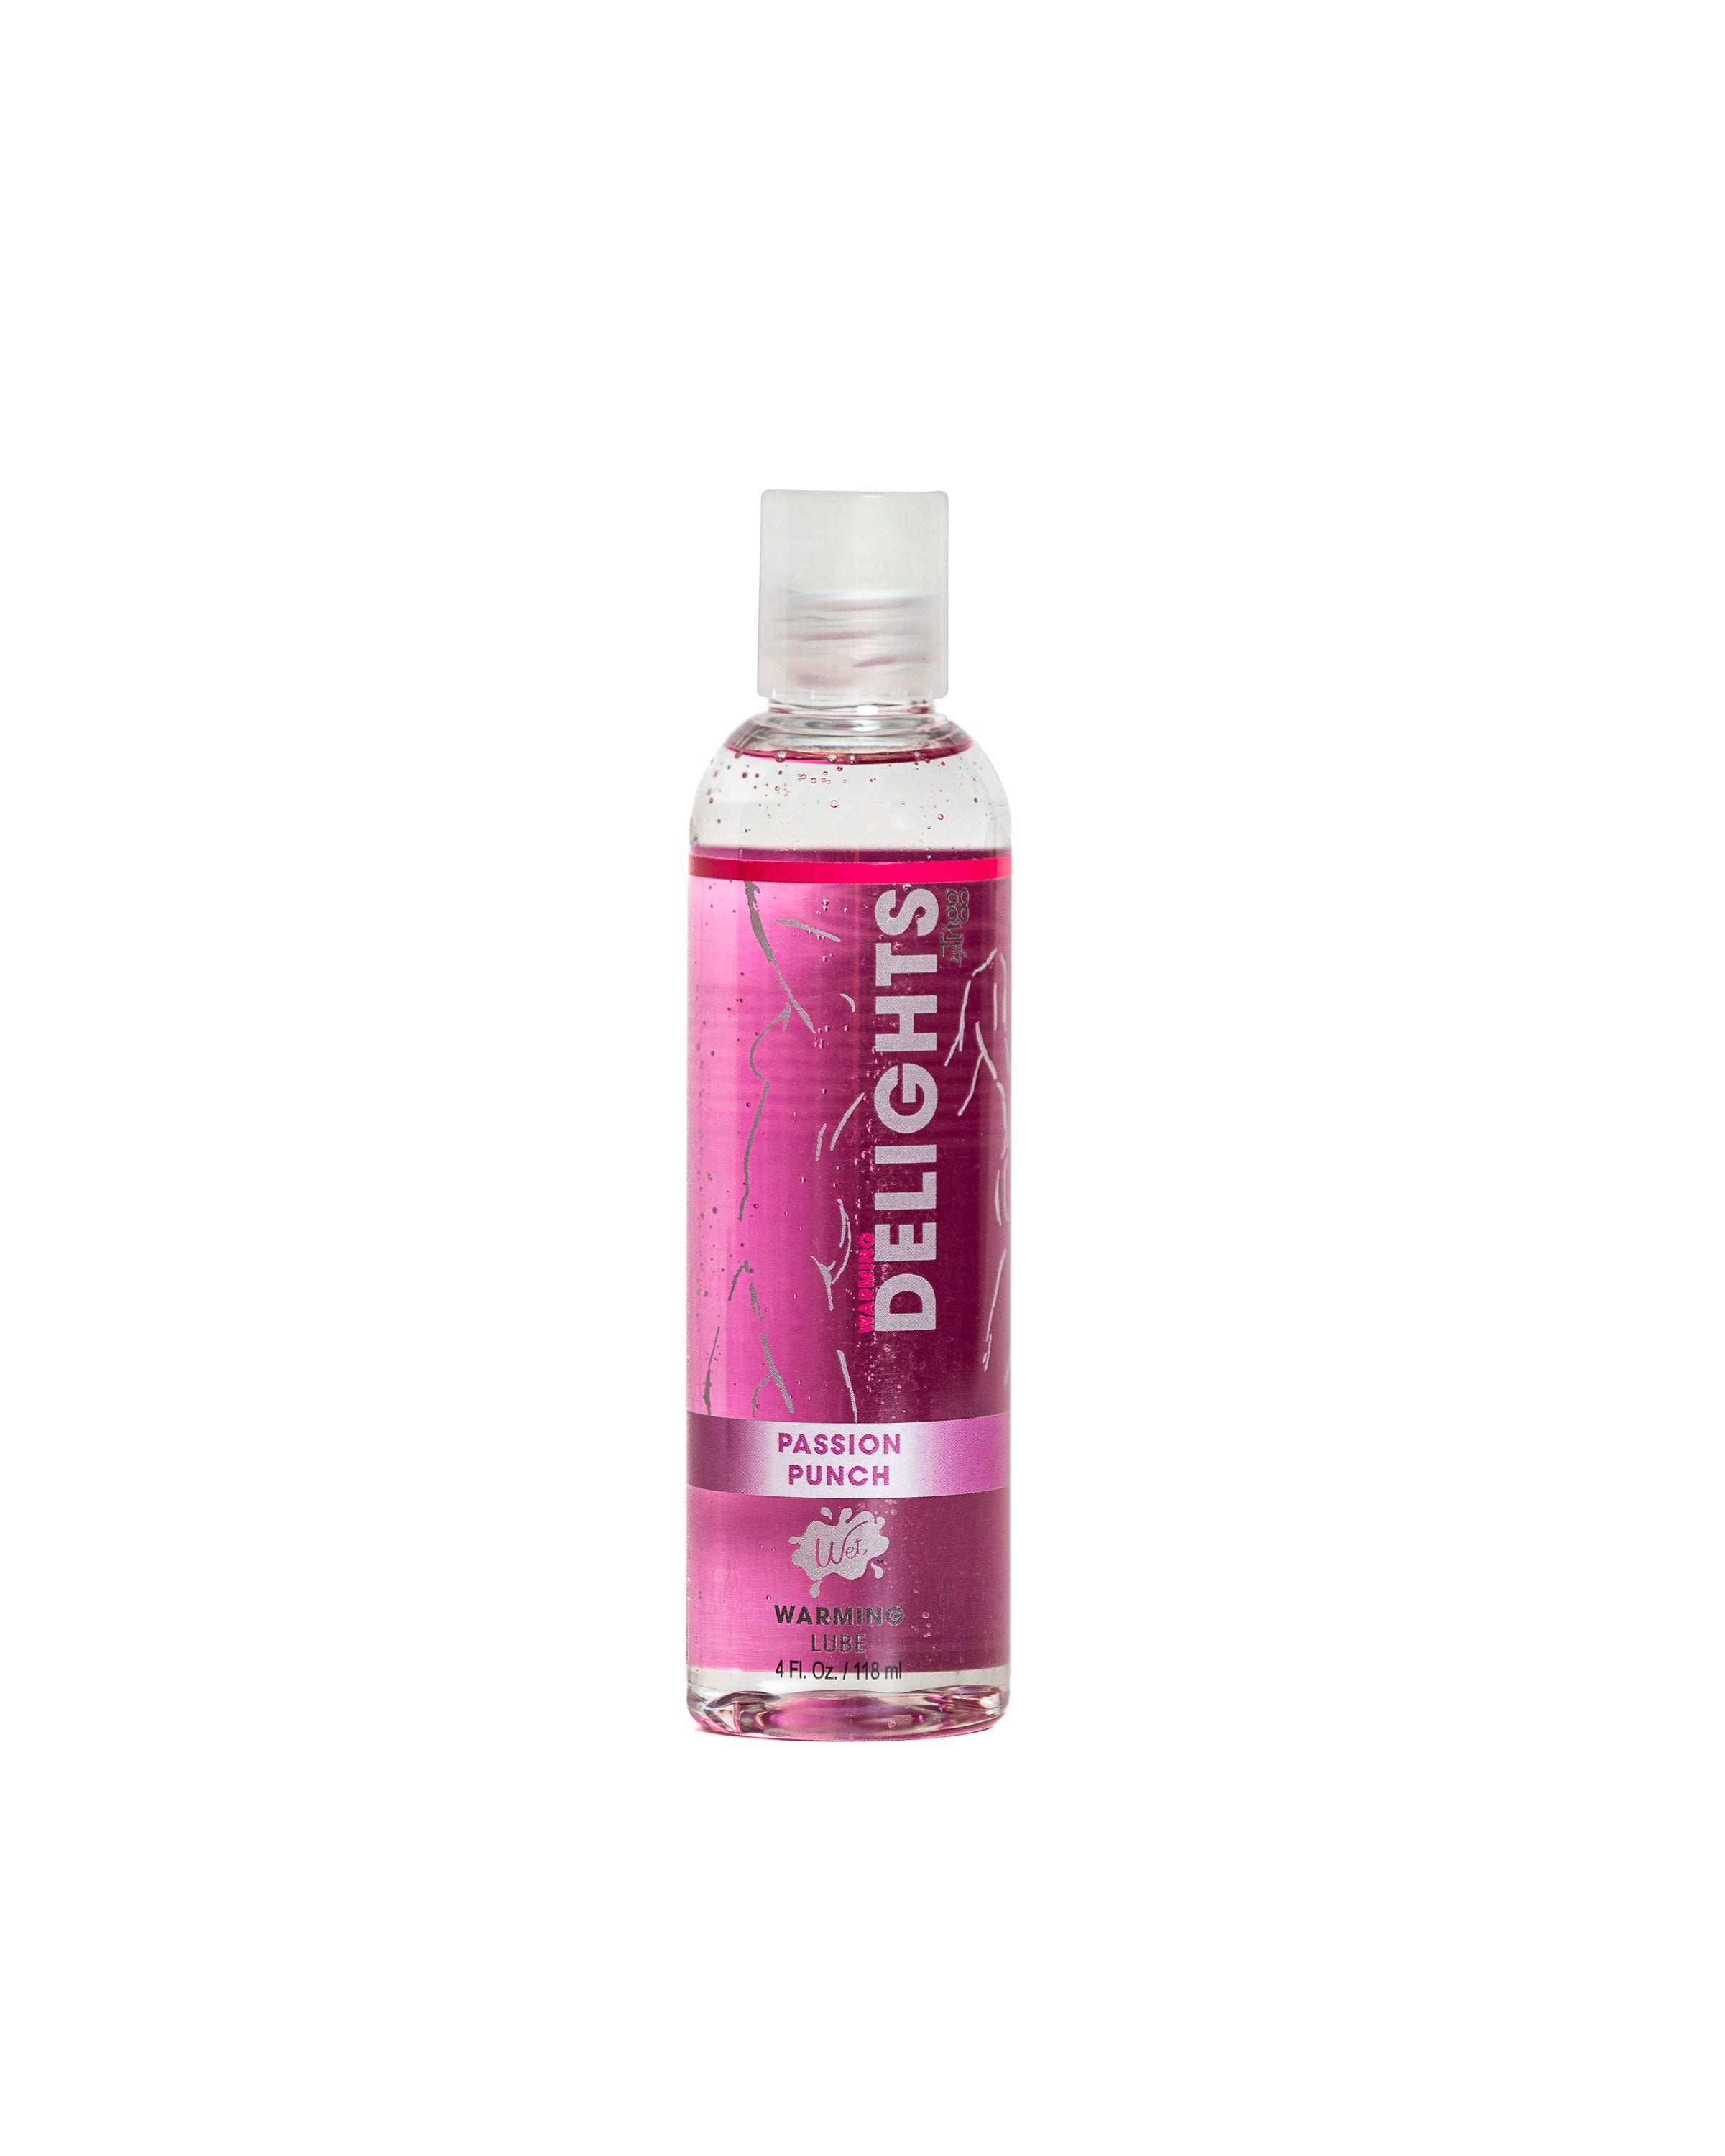 Warming Delights - Passion Punch - Flavored Lube 4 Oz-0